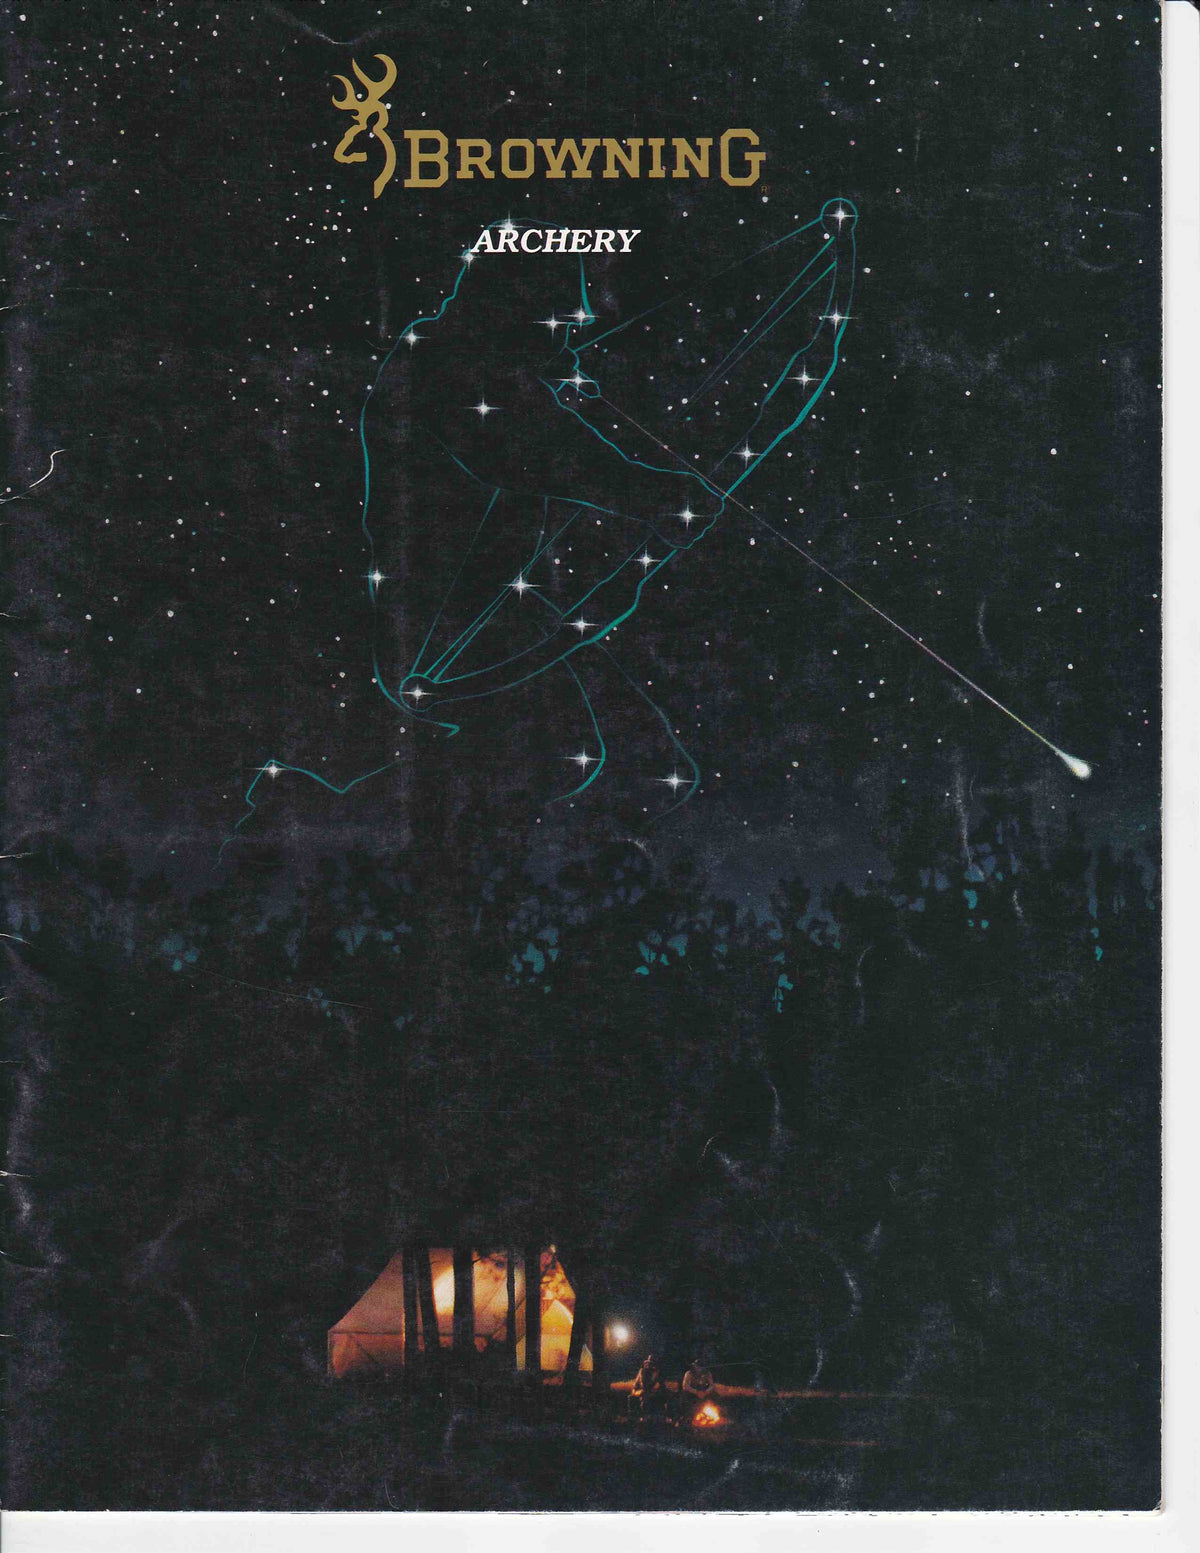 Browning Archery Catalogues 1988 1989 1991 - Canada Brass - 